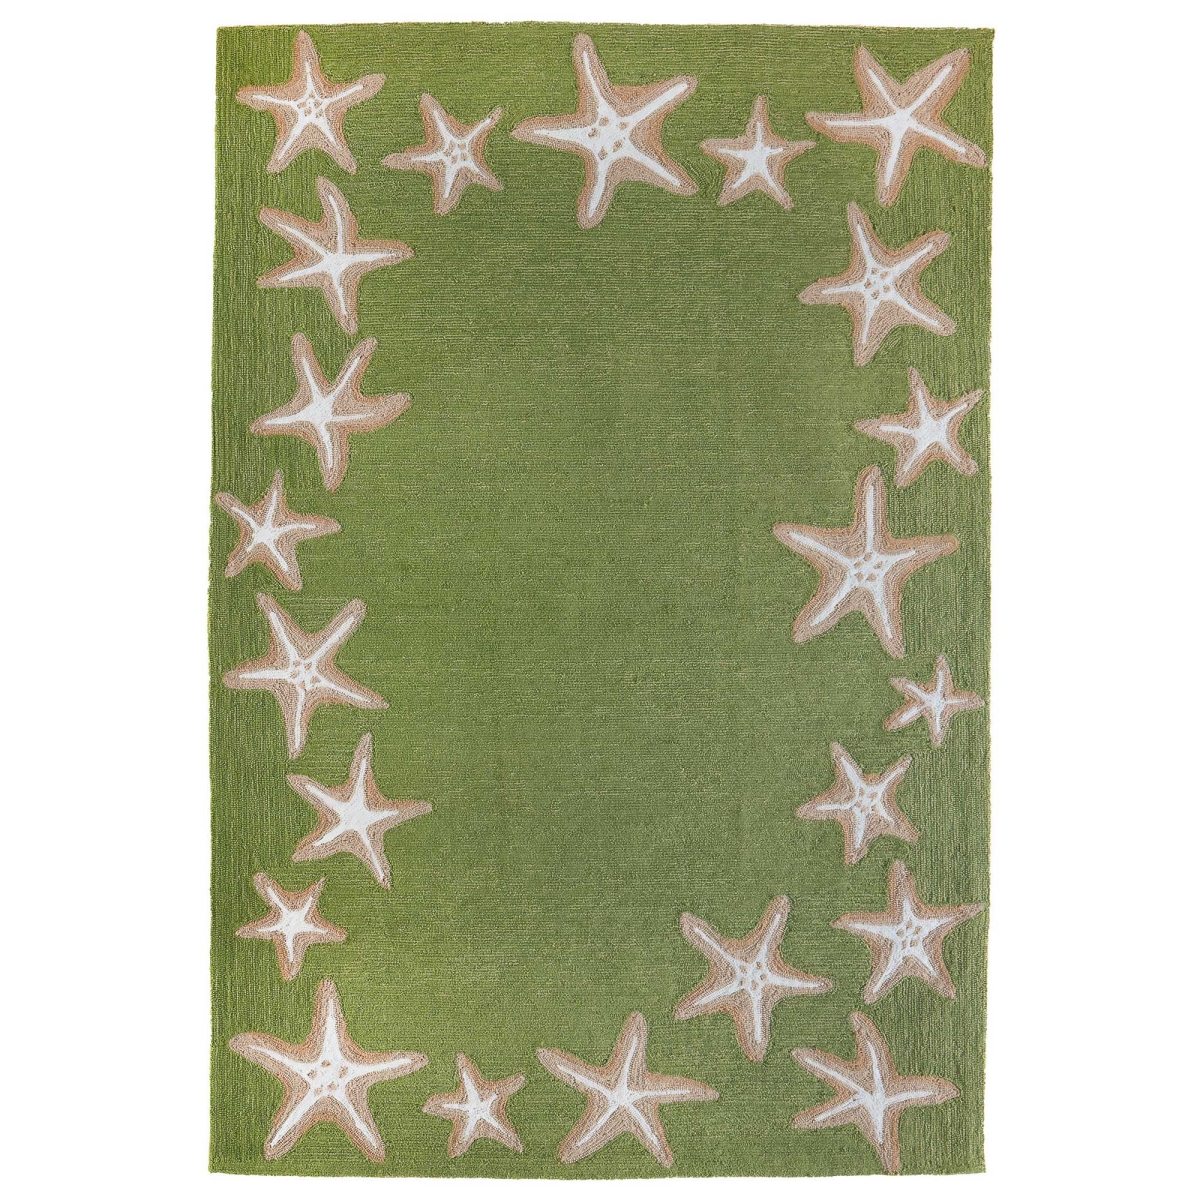 Trans-ocean Imports Cap71171006 7 Ft. 6 In. X 9 Ft. 6 In. Liora Manne Capri Starfish Border Indoor & Outdoor Hand Tufted Rectangle Rug - Green